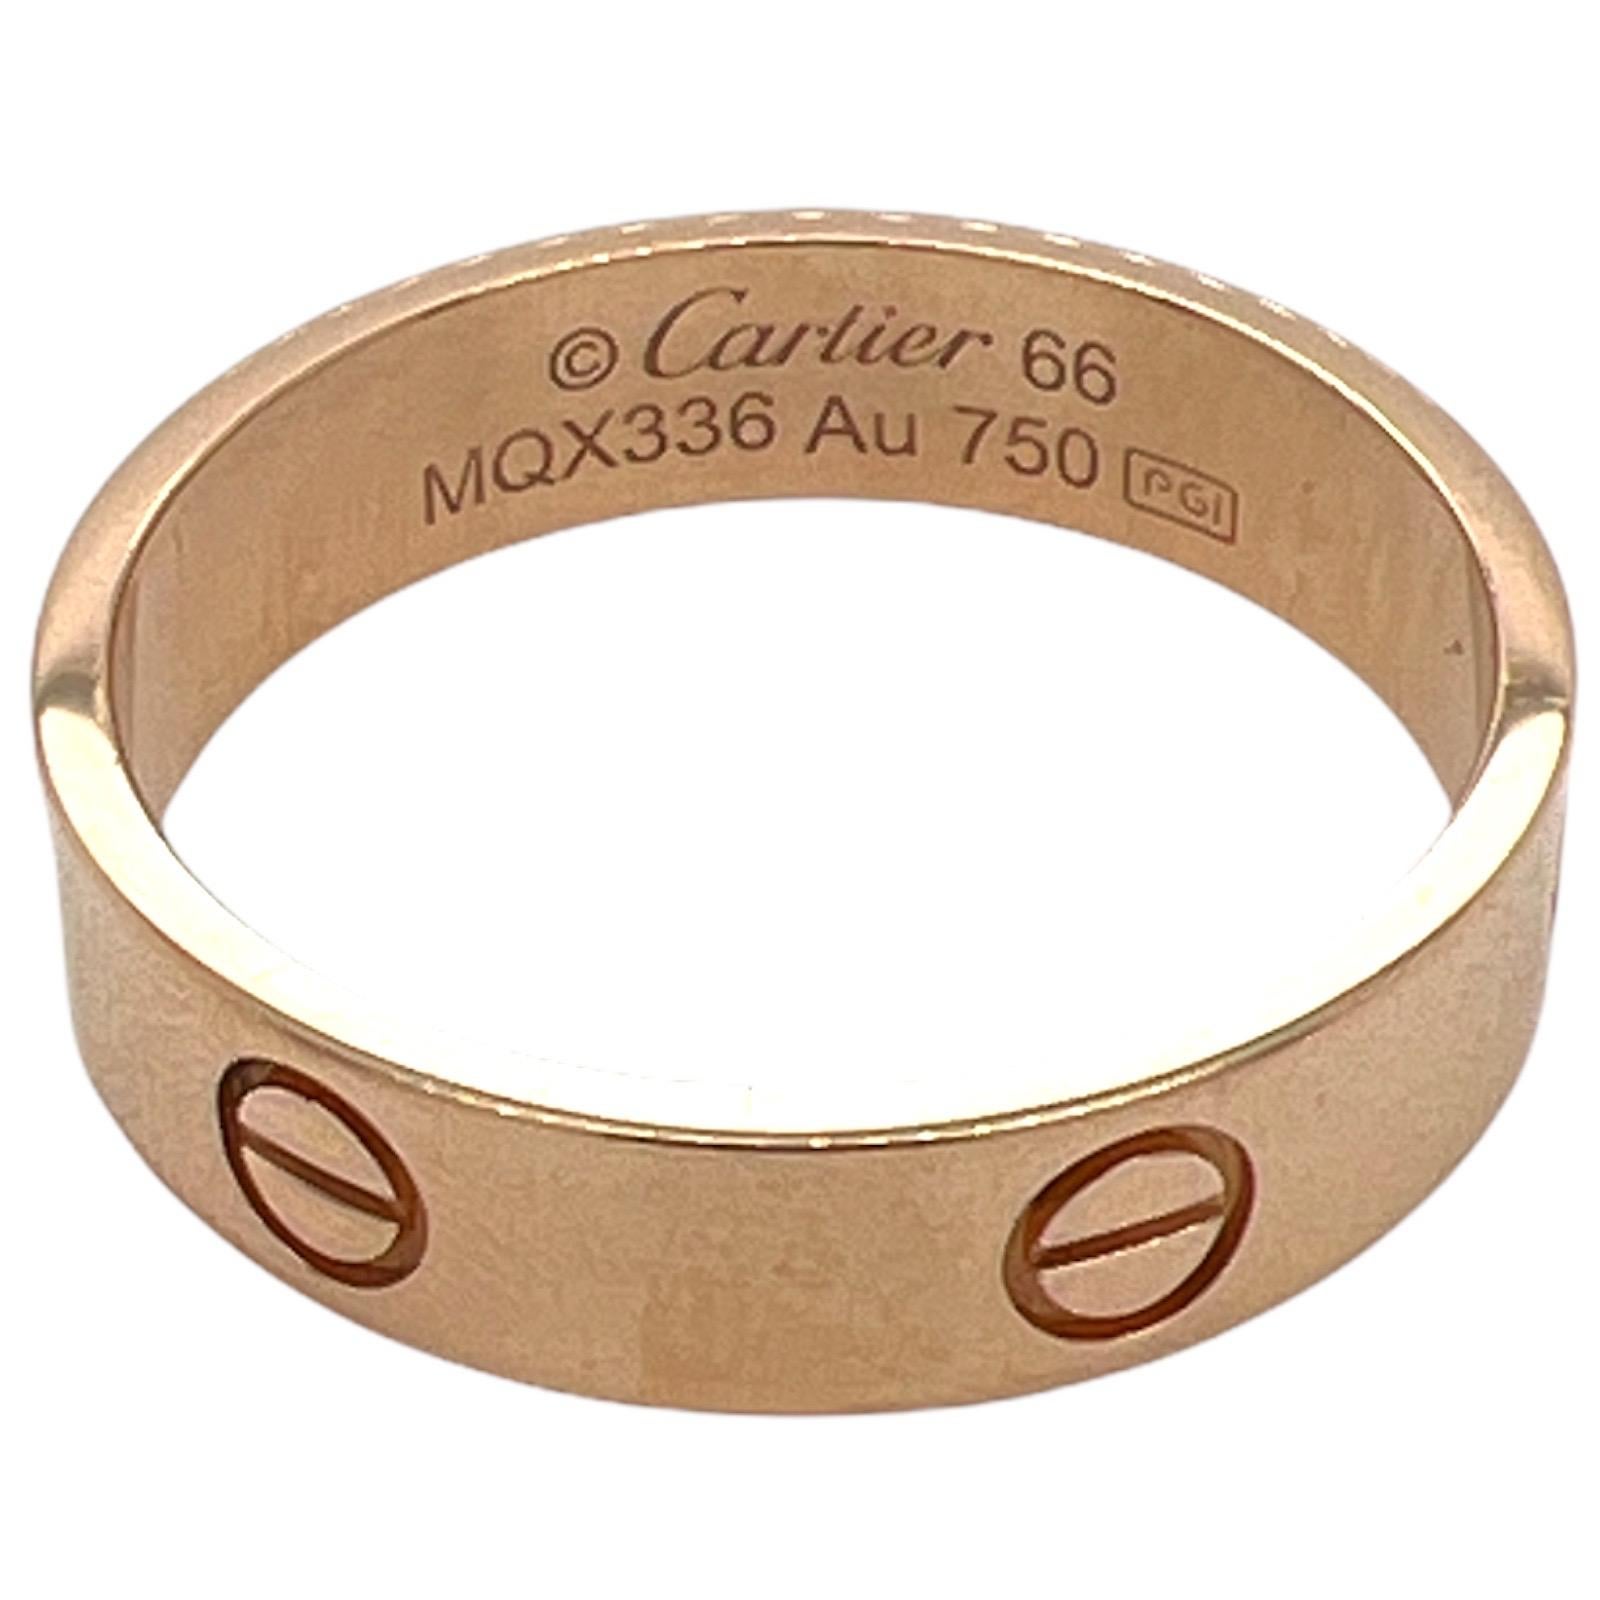 Cartier's iconic LOVE ring fashioned in 18 karat rose gold. The band measures 5.5mm in width and is size 66 (US size 11.5). The band includes original papers. 